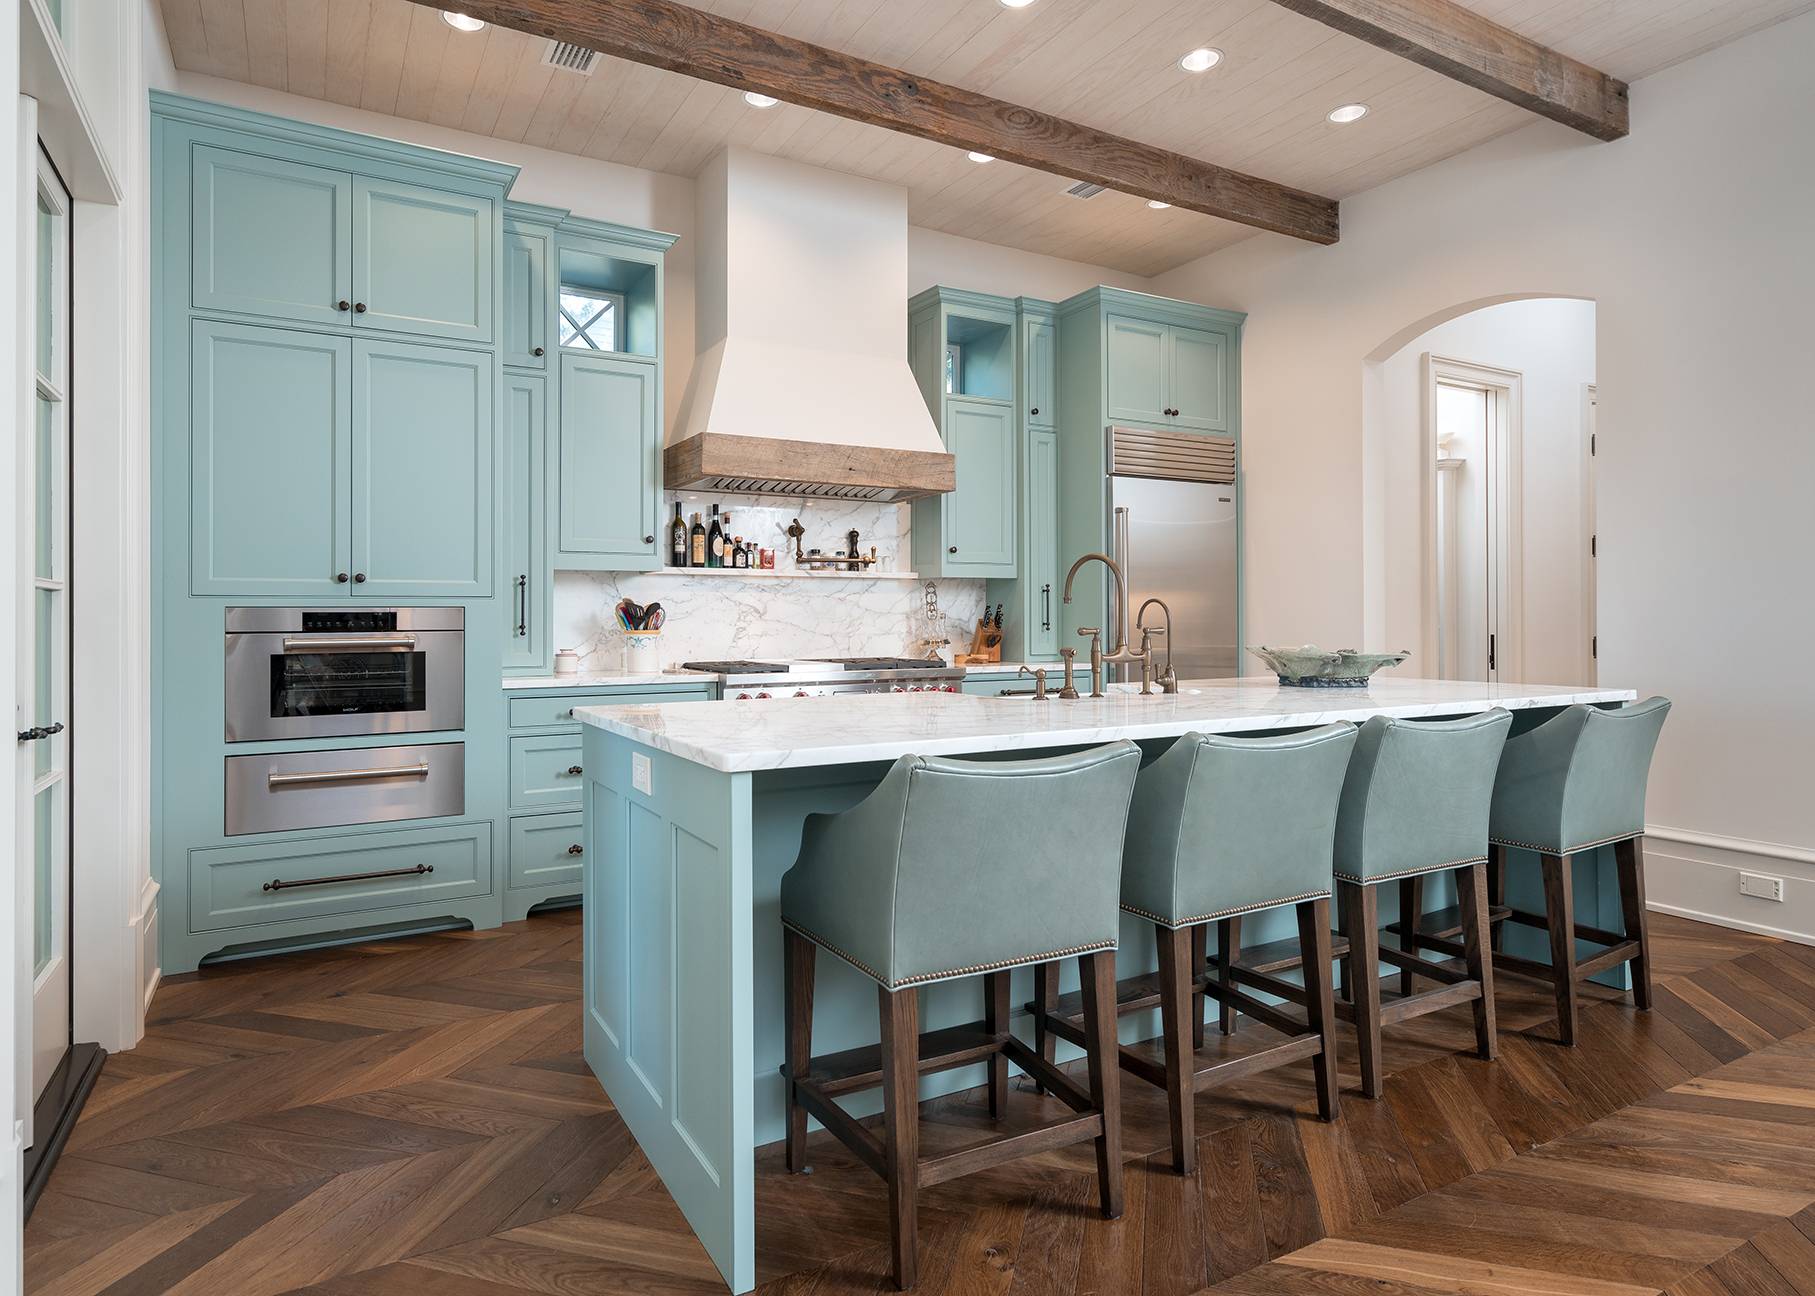 This custom kitchen has inset shaker doors painted a sea blue with specialty window cutouts framing the hood